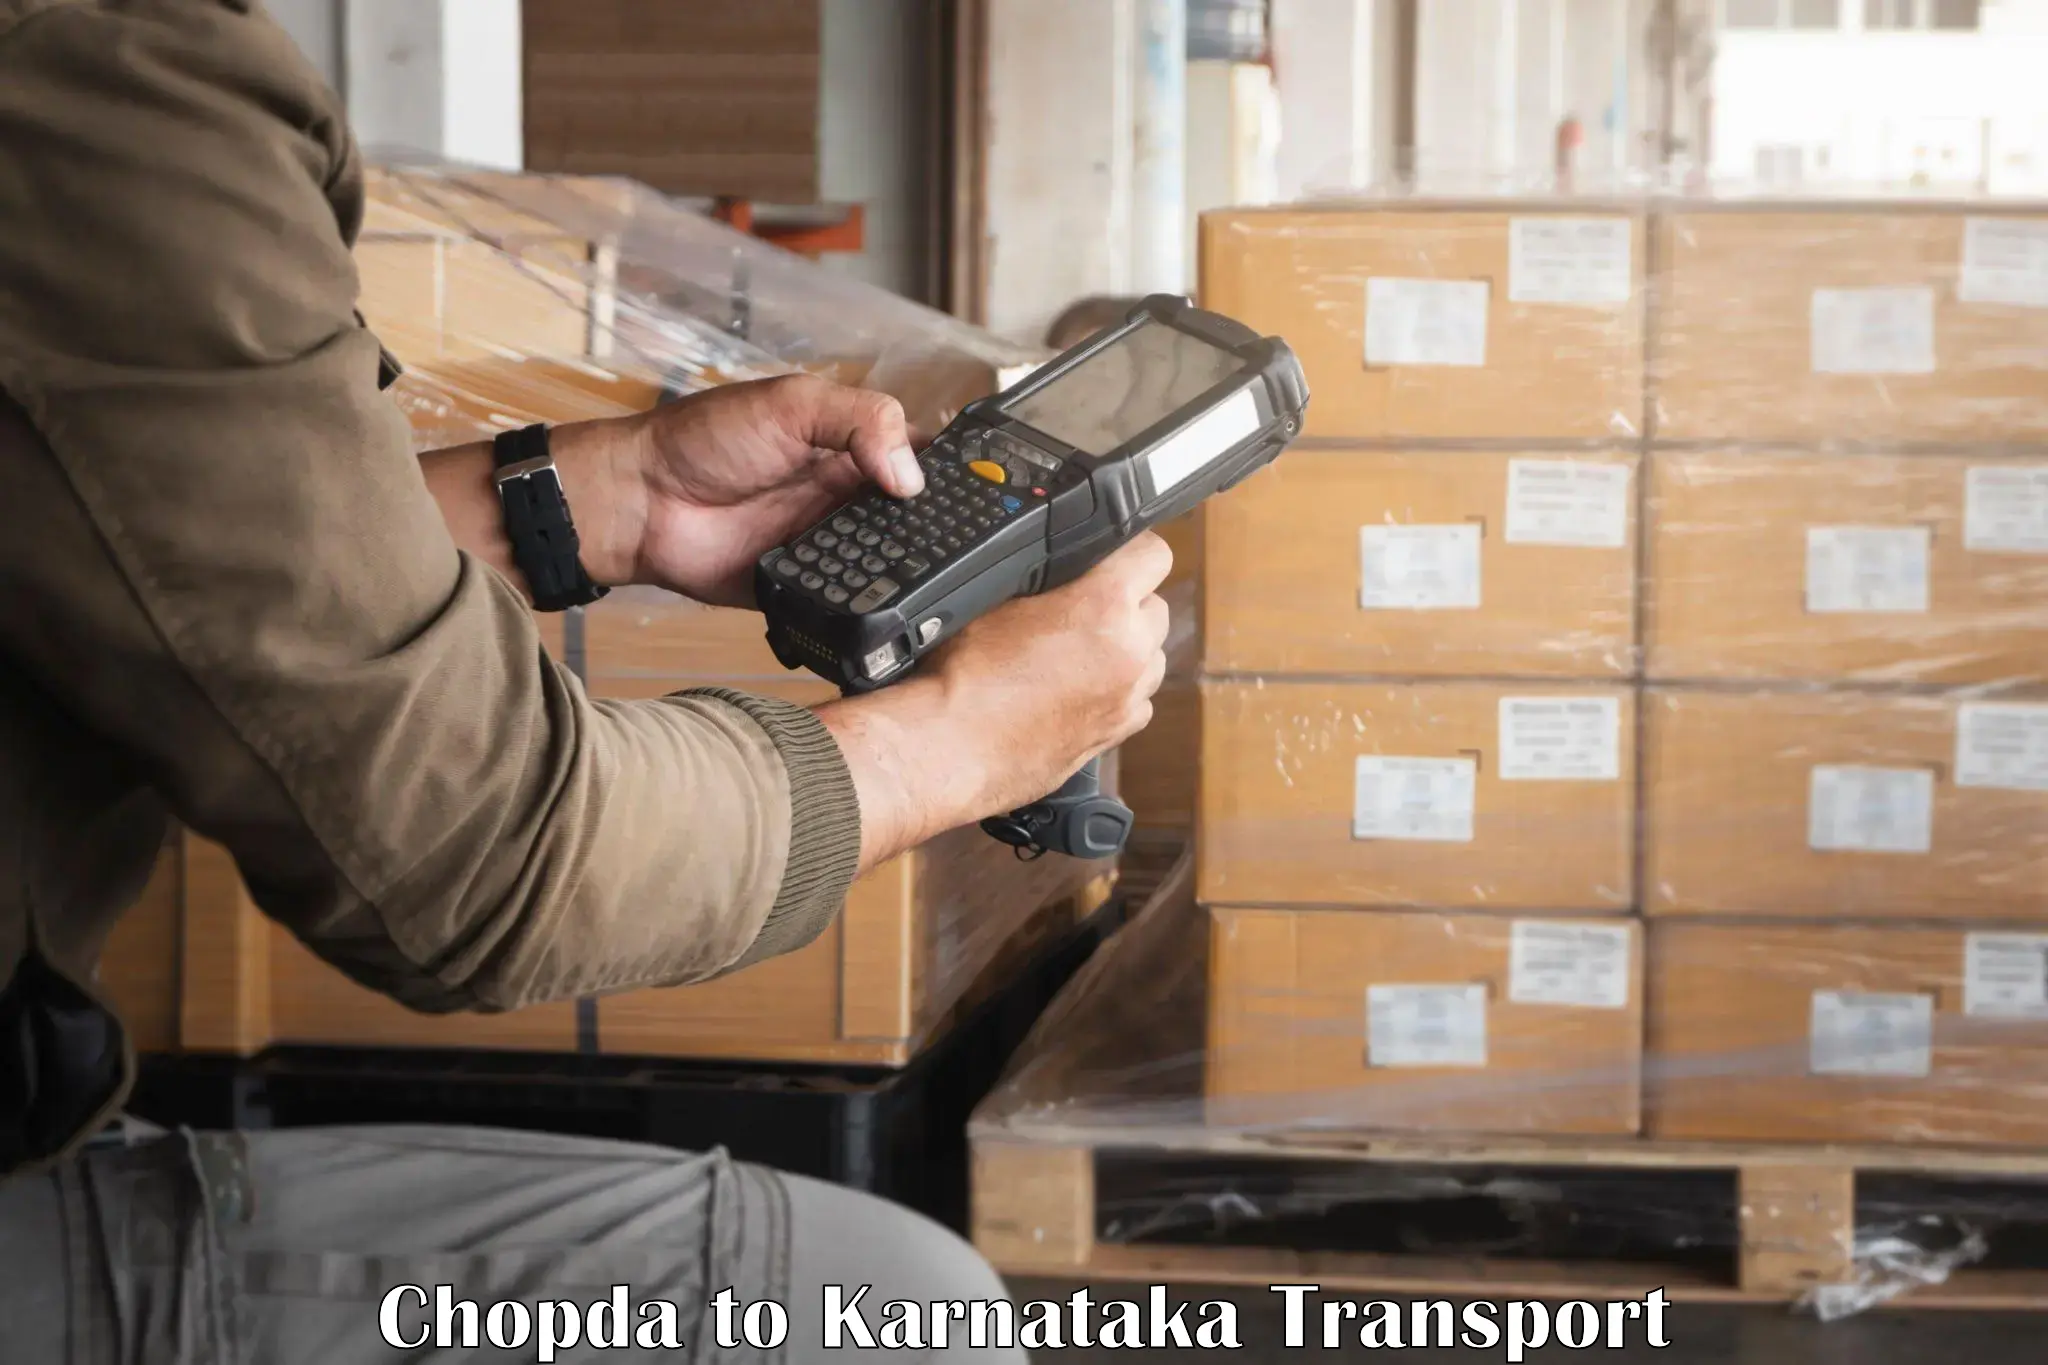 Air freight transport services Chopda to Manipal